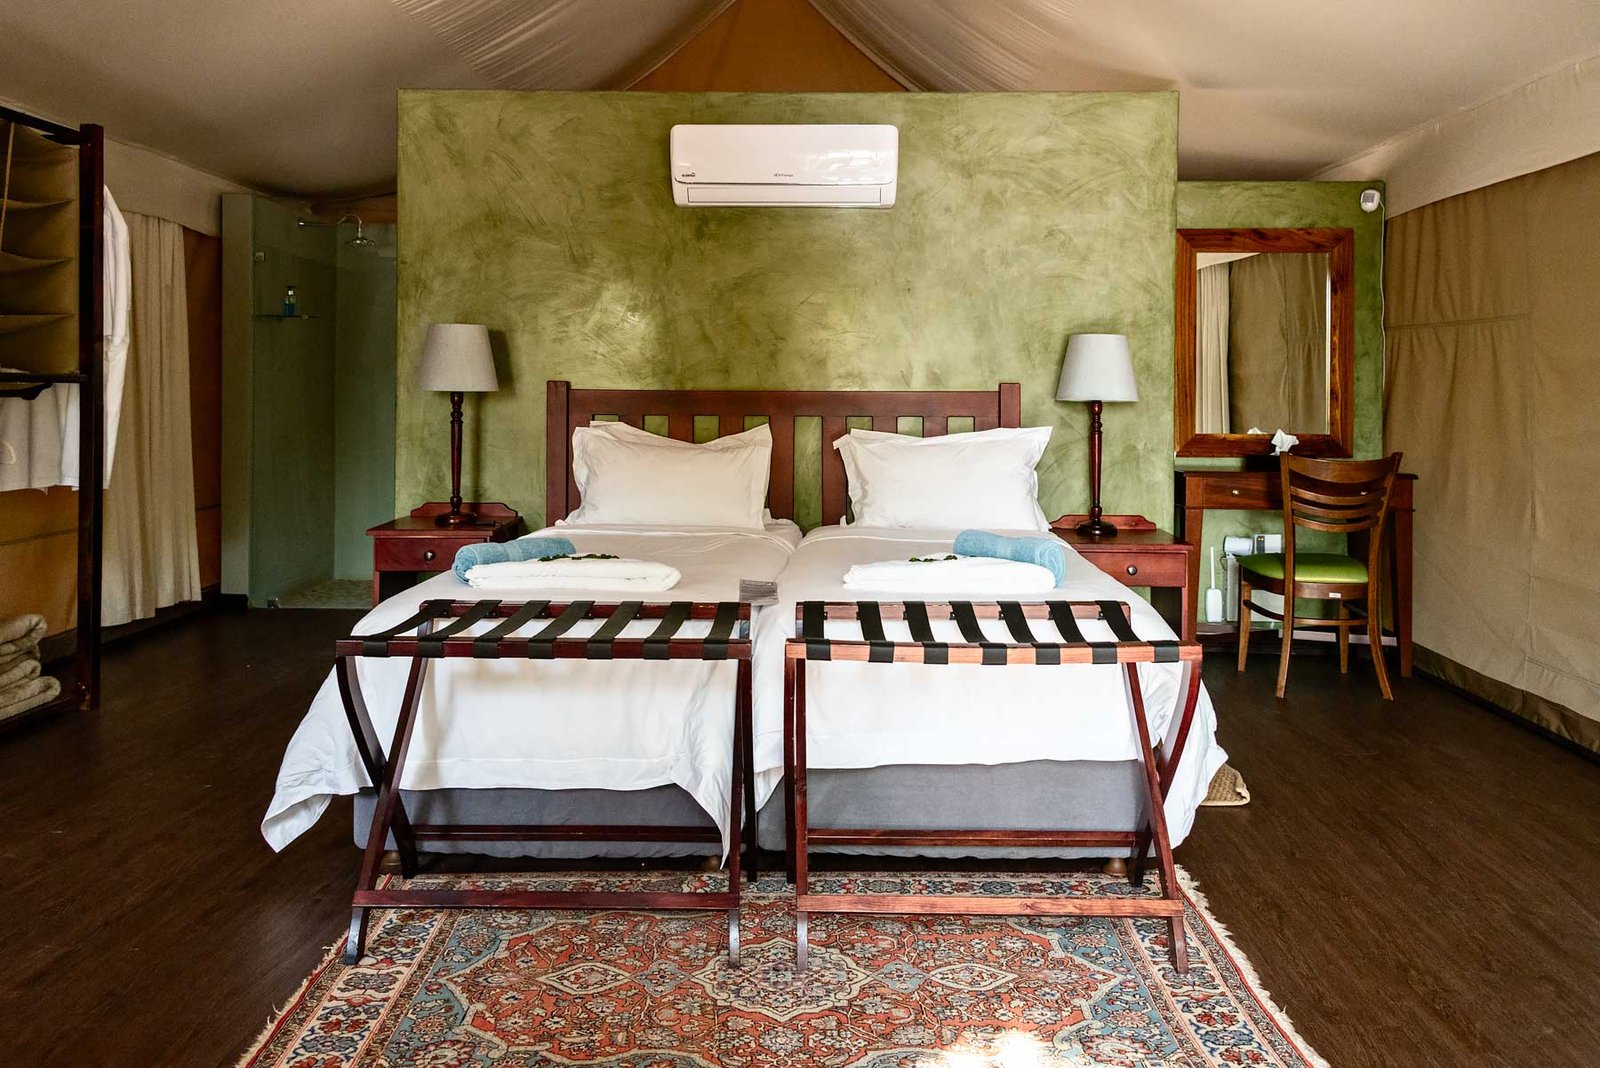 Glamping at Phelwana Game Lodge near Kruger Park. South Africa in 3 Weeks | The Perfect South Africa itinerary for your first trip.